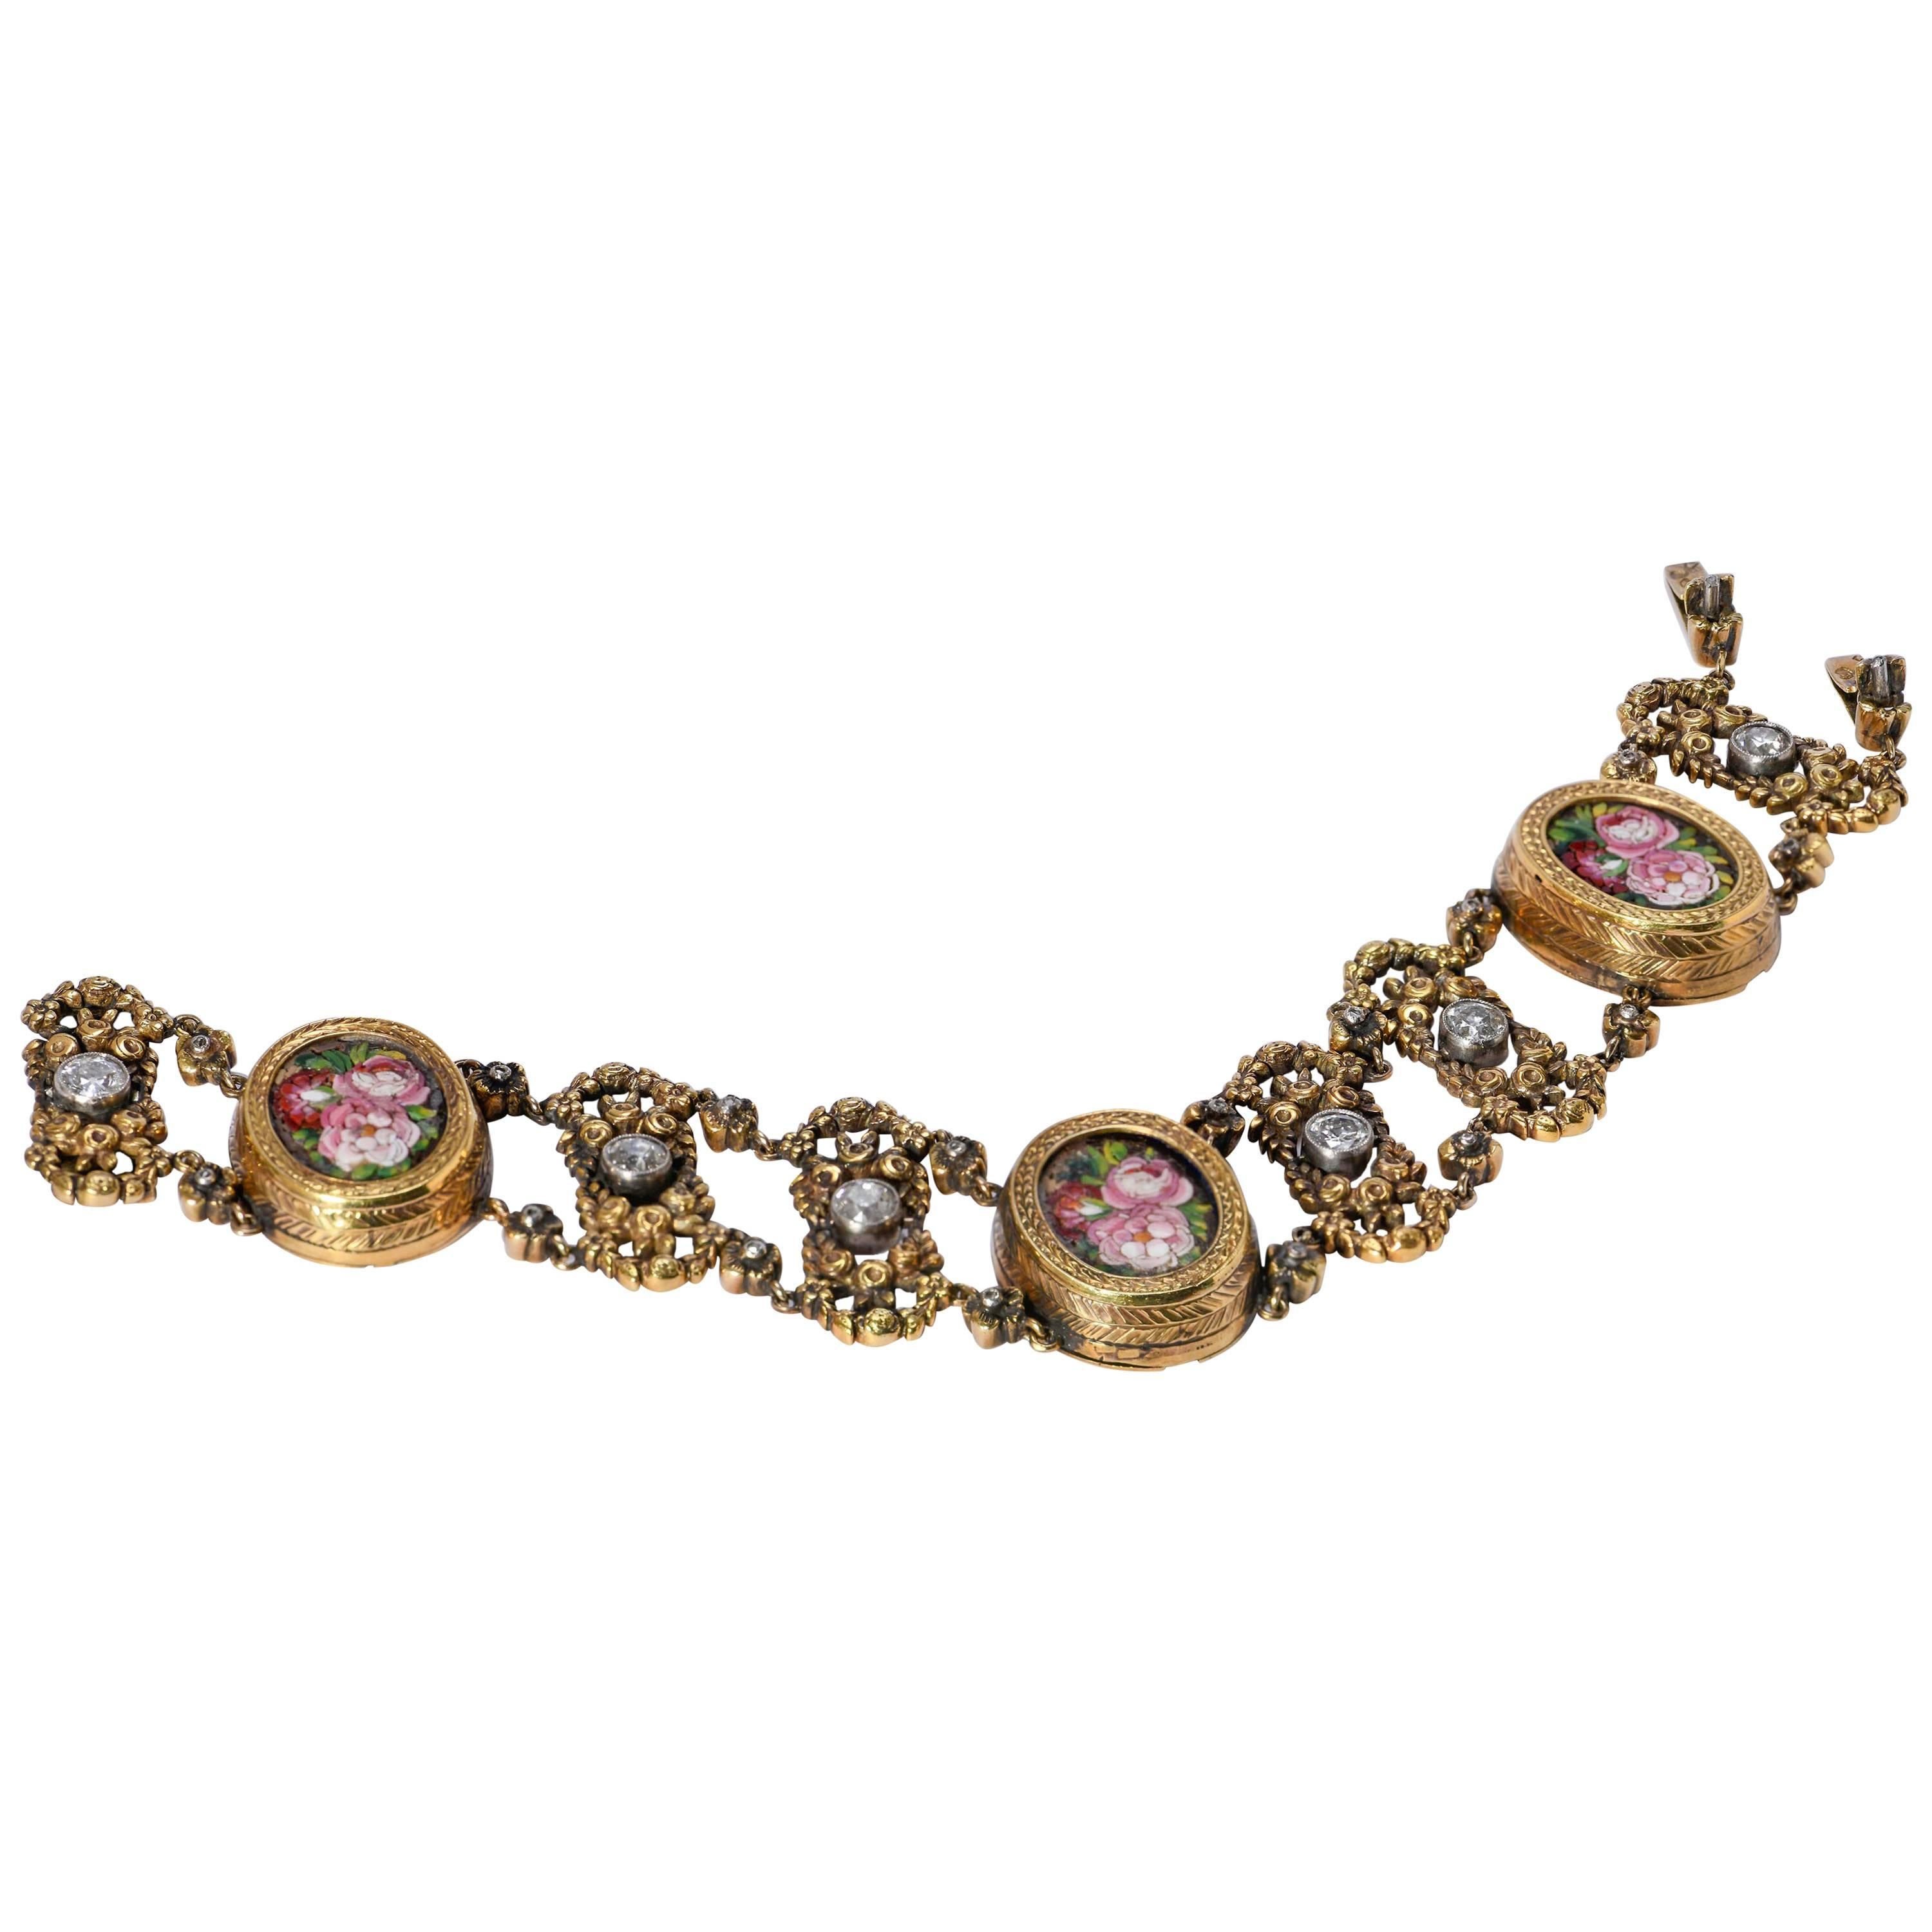 Early 20th Century 18 Karat Yellow Gold and Platinum French Micromosaic Bracelet